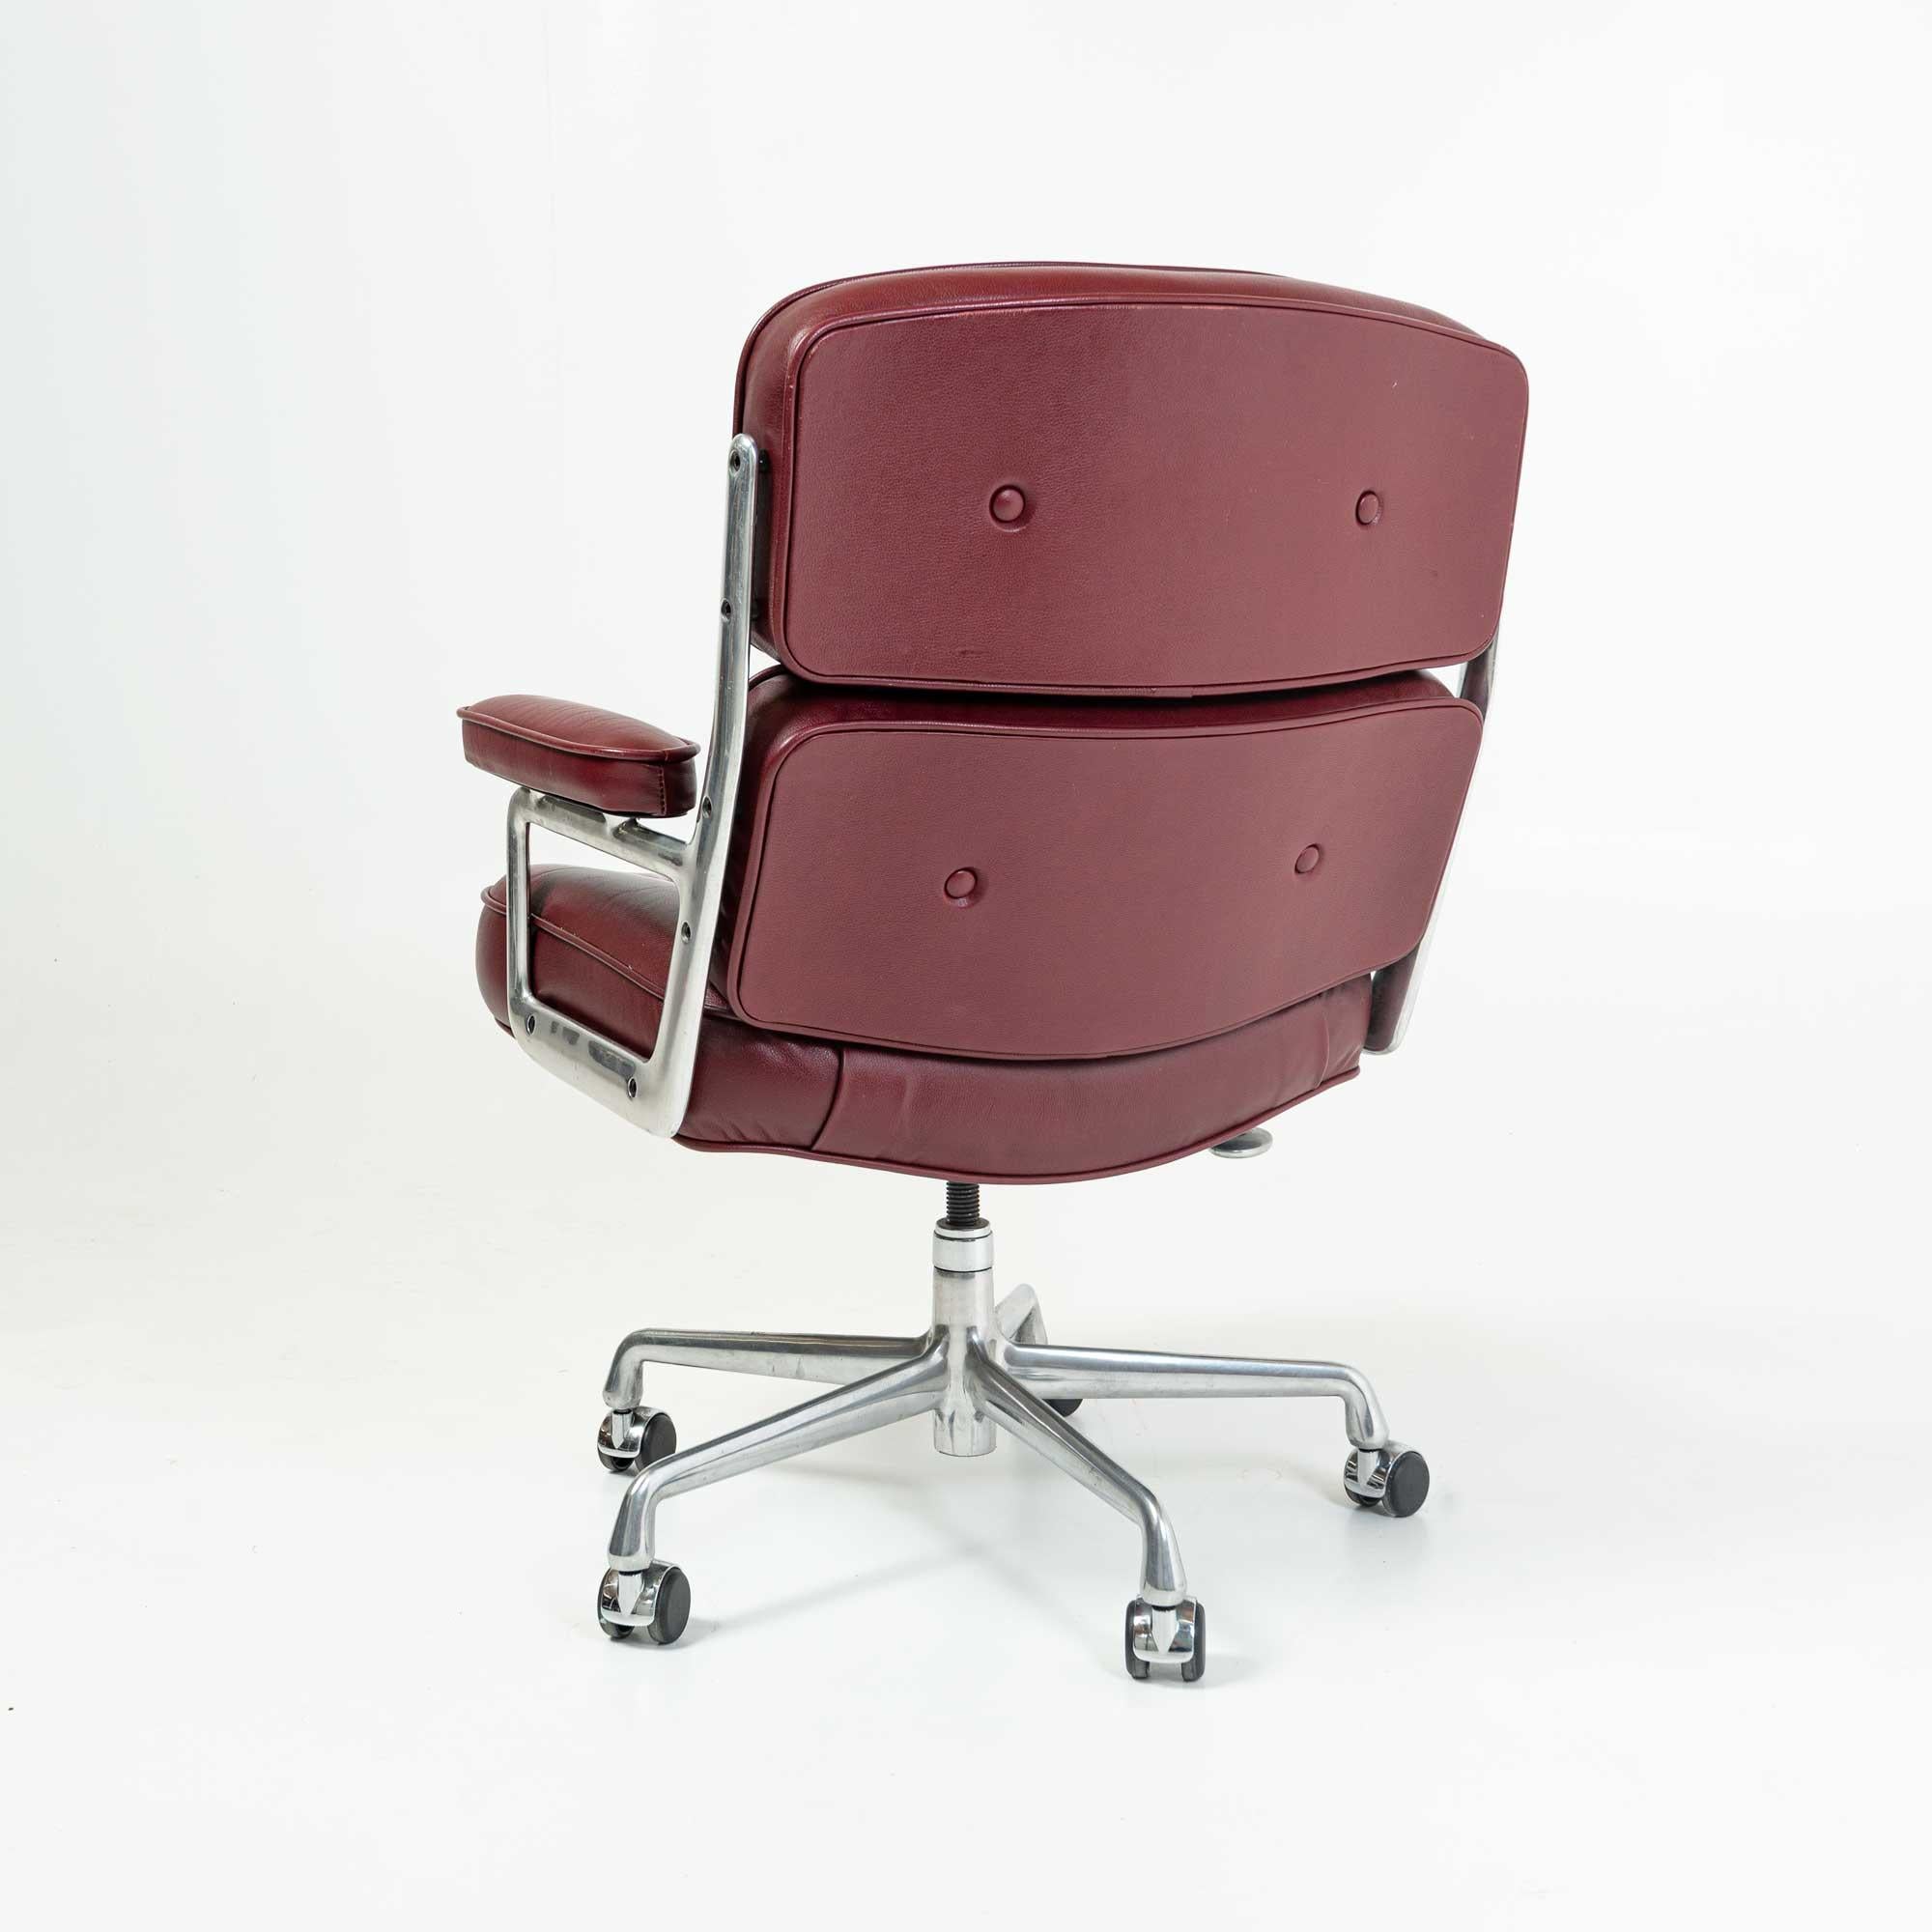 Mid-Century Modern Eames Time Life Desk Chair in Original Maroon Leather